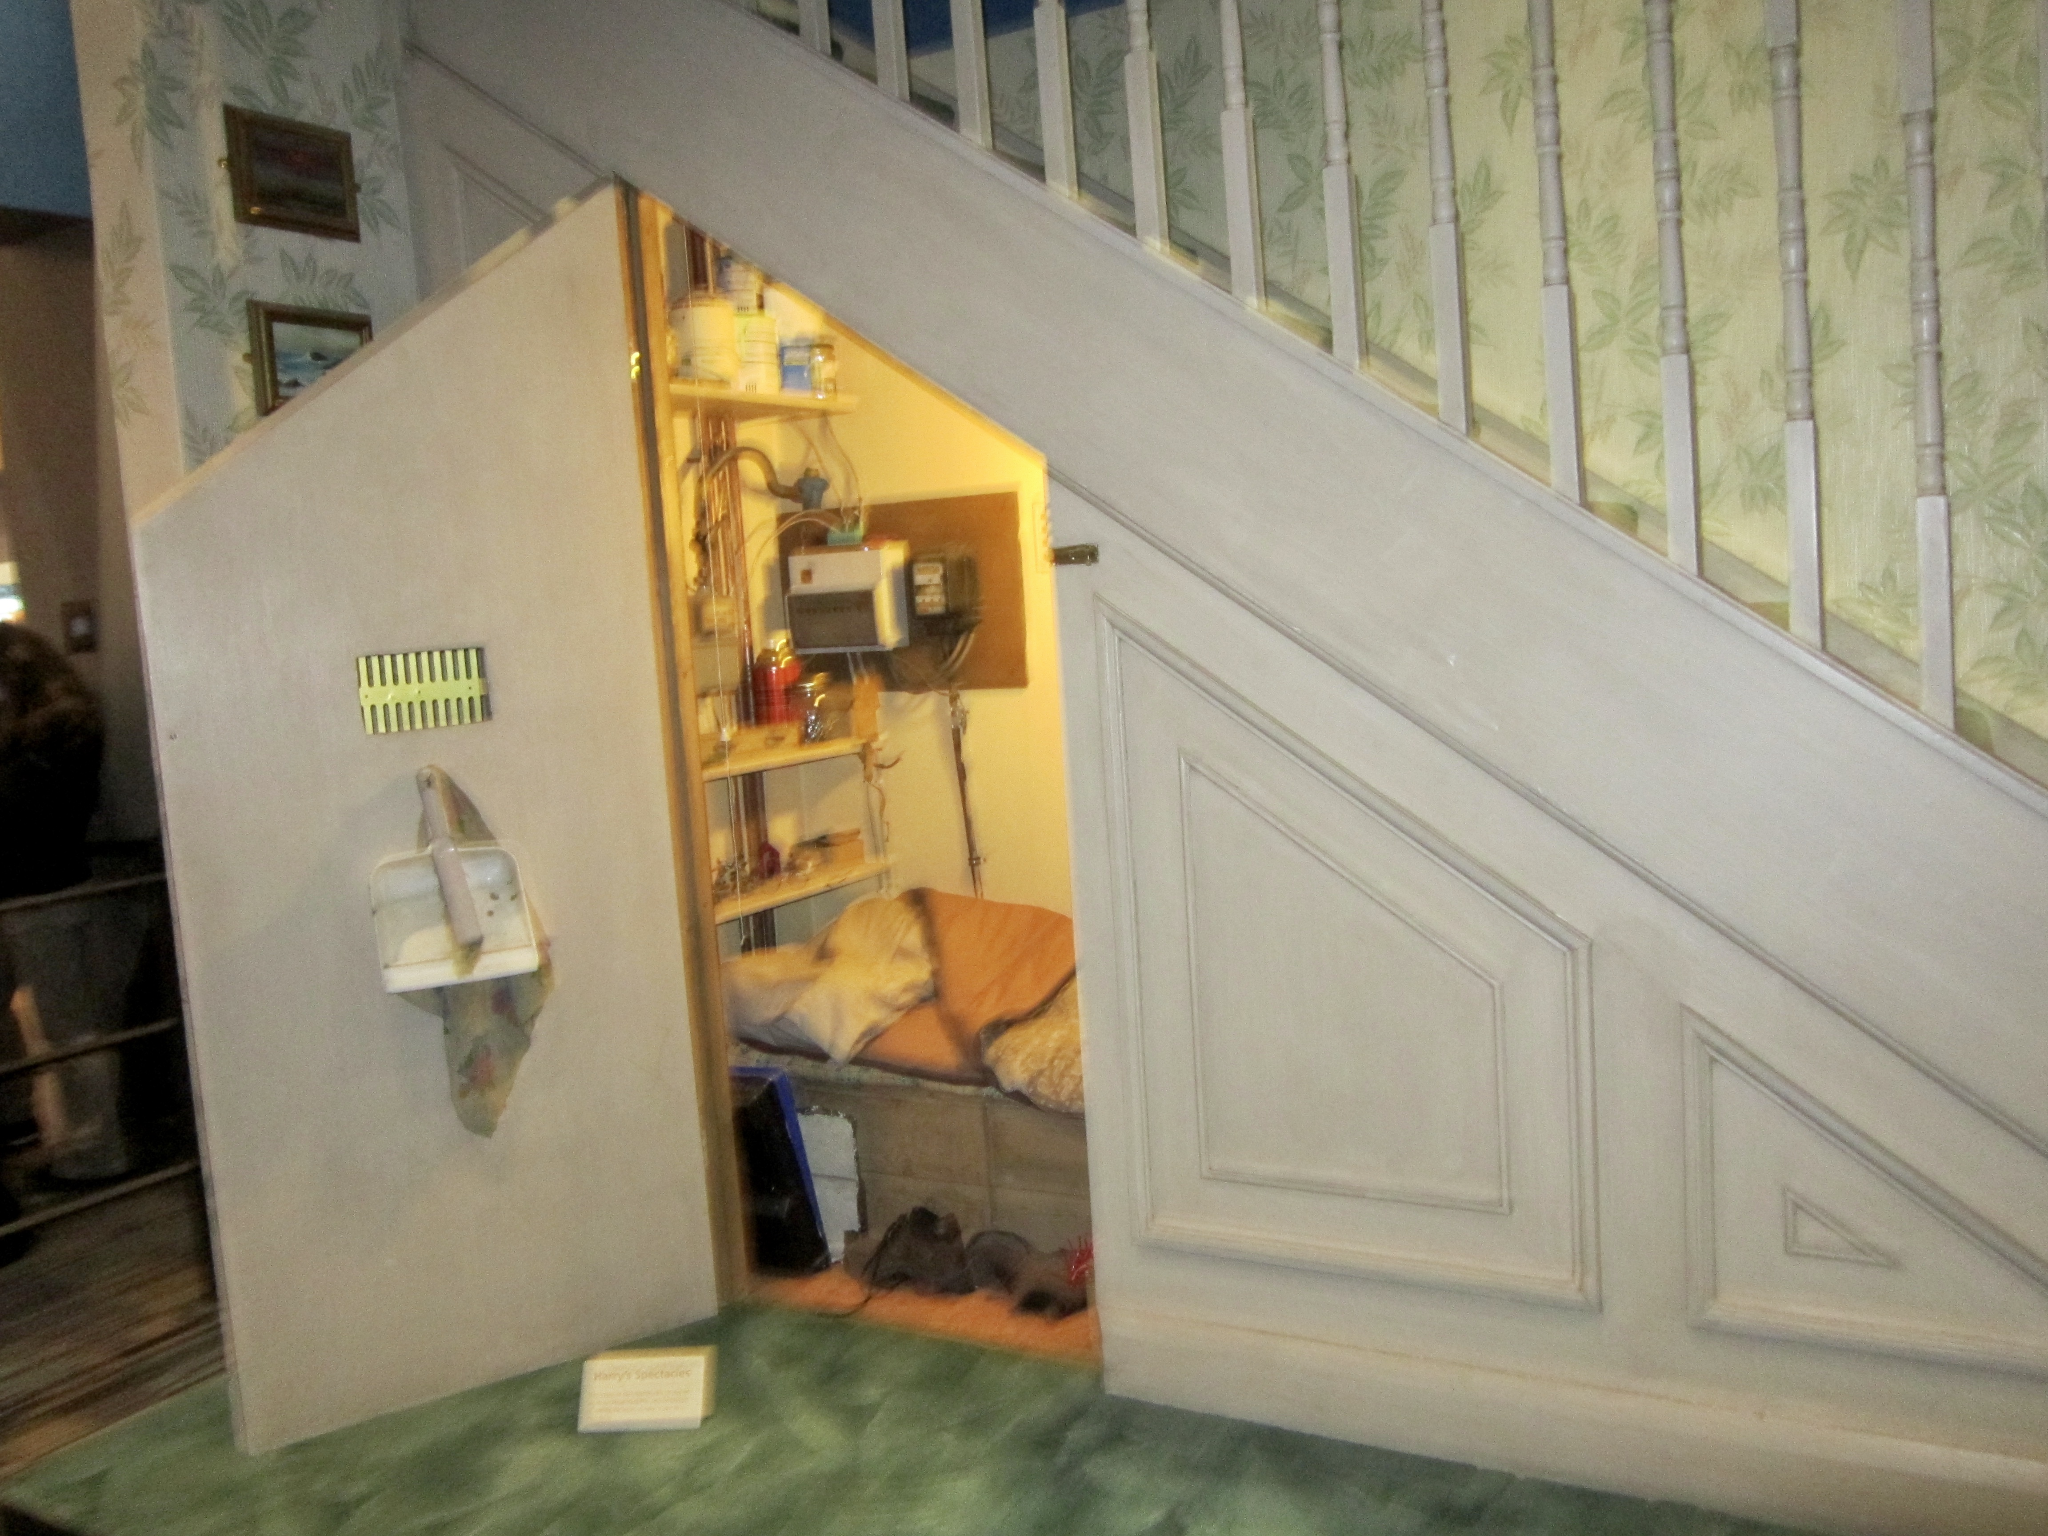 Harry Potter’s Cupboard under the Stairs Photo